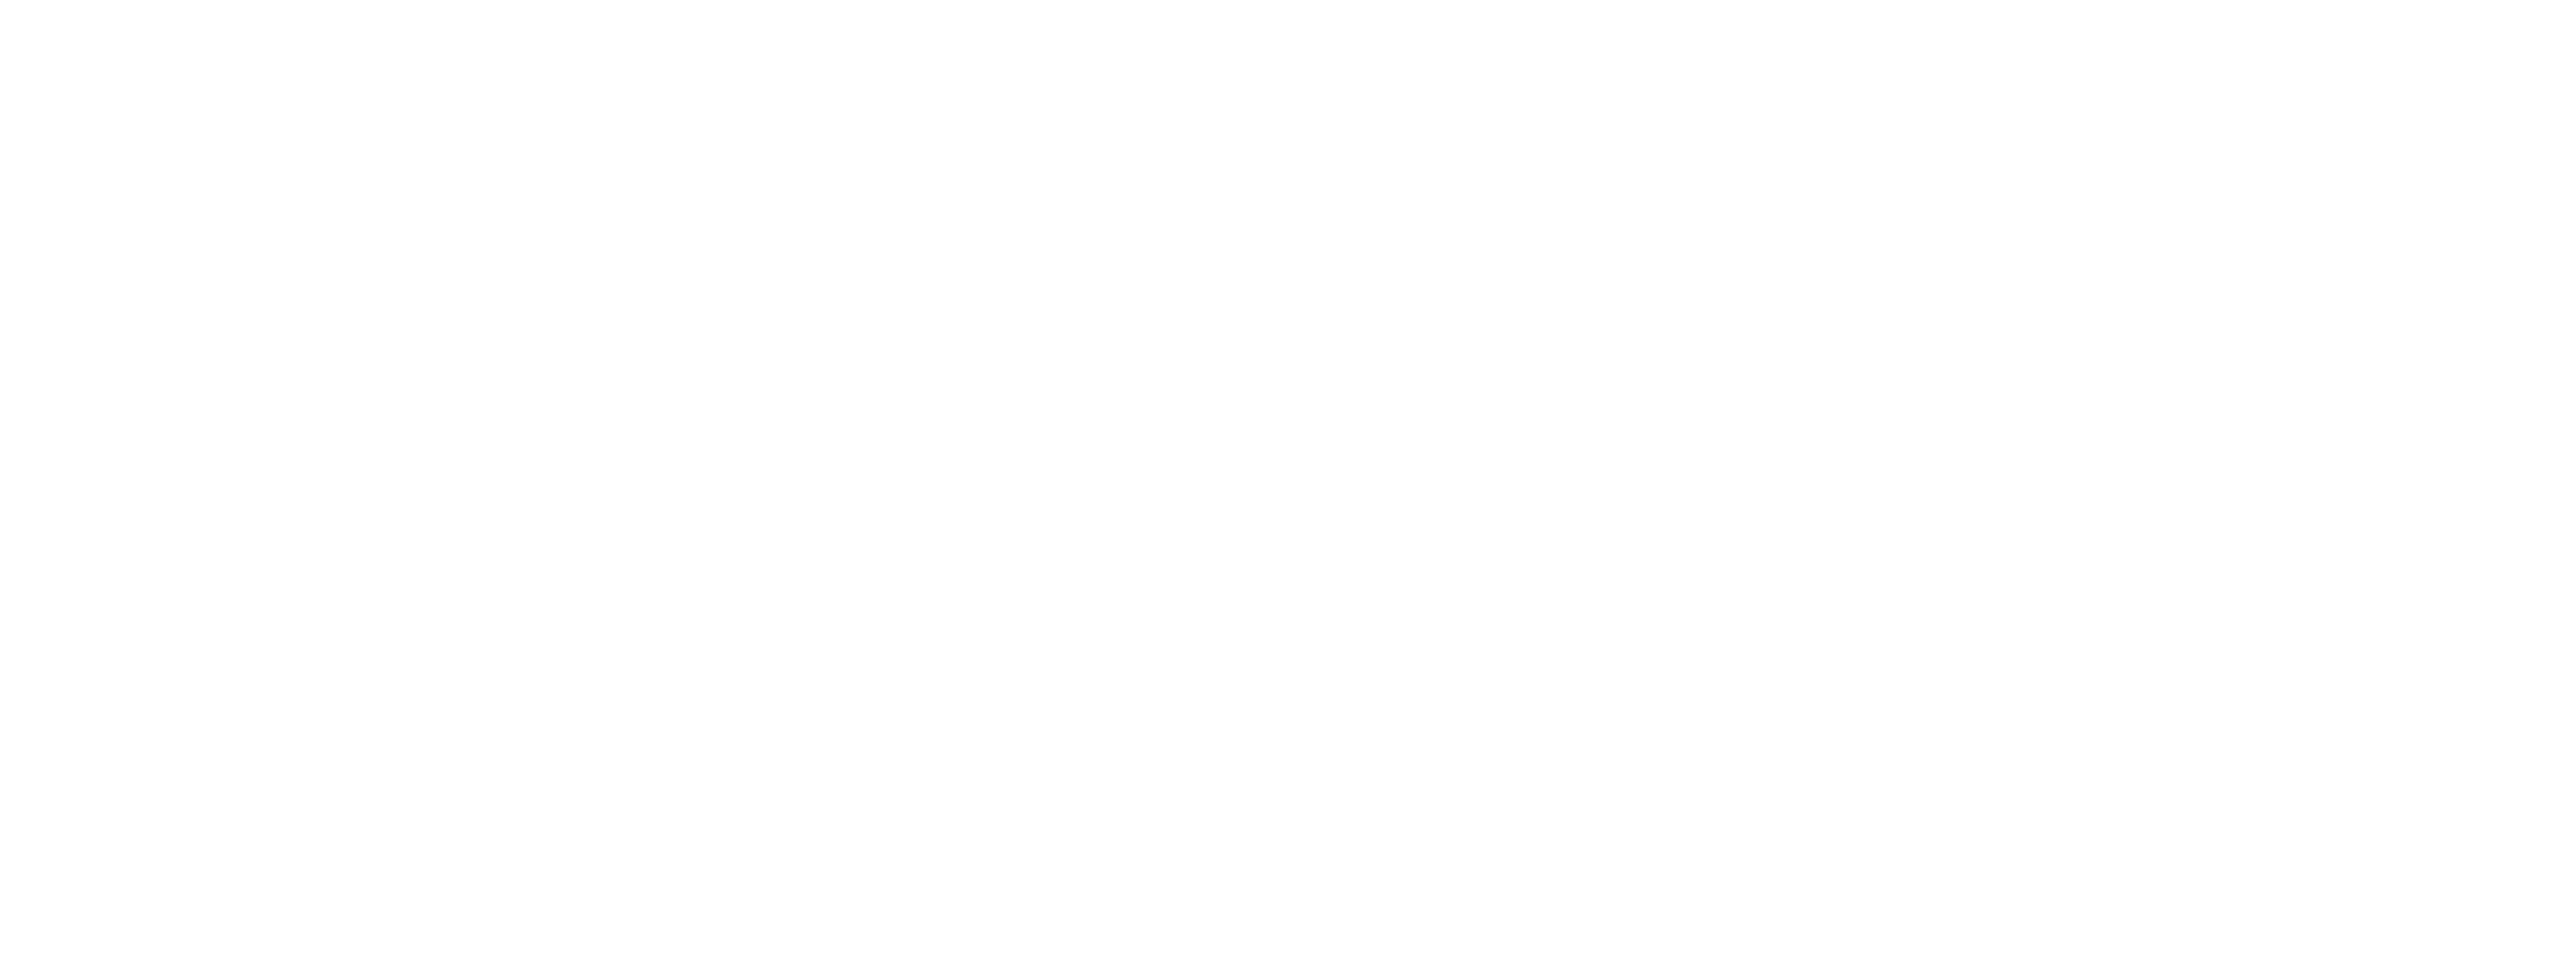 Nationals Philanthropies open three new charitable initiatives for fans